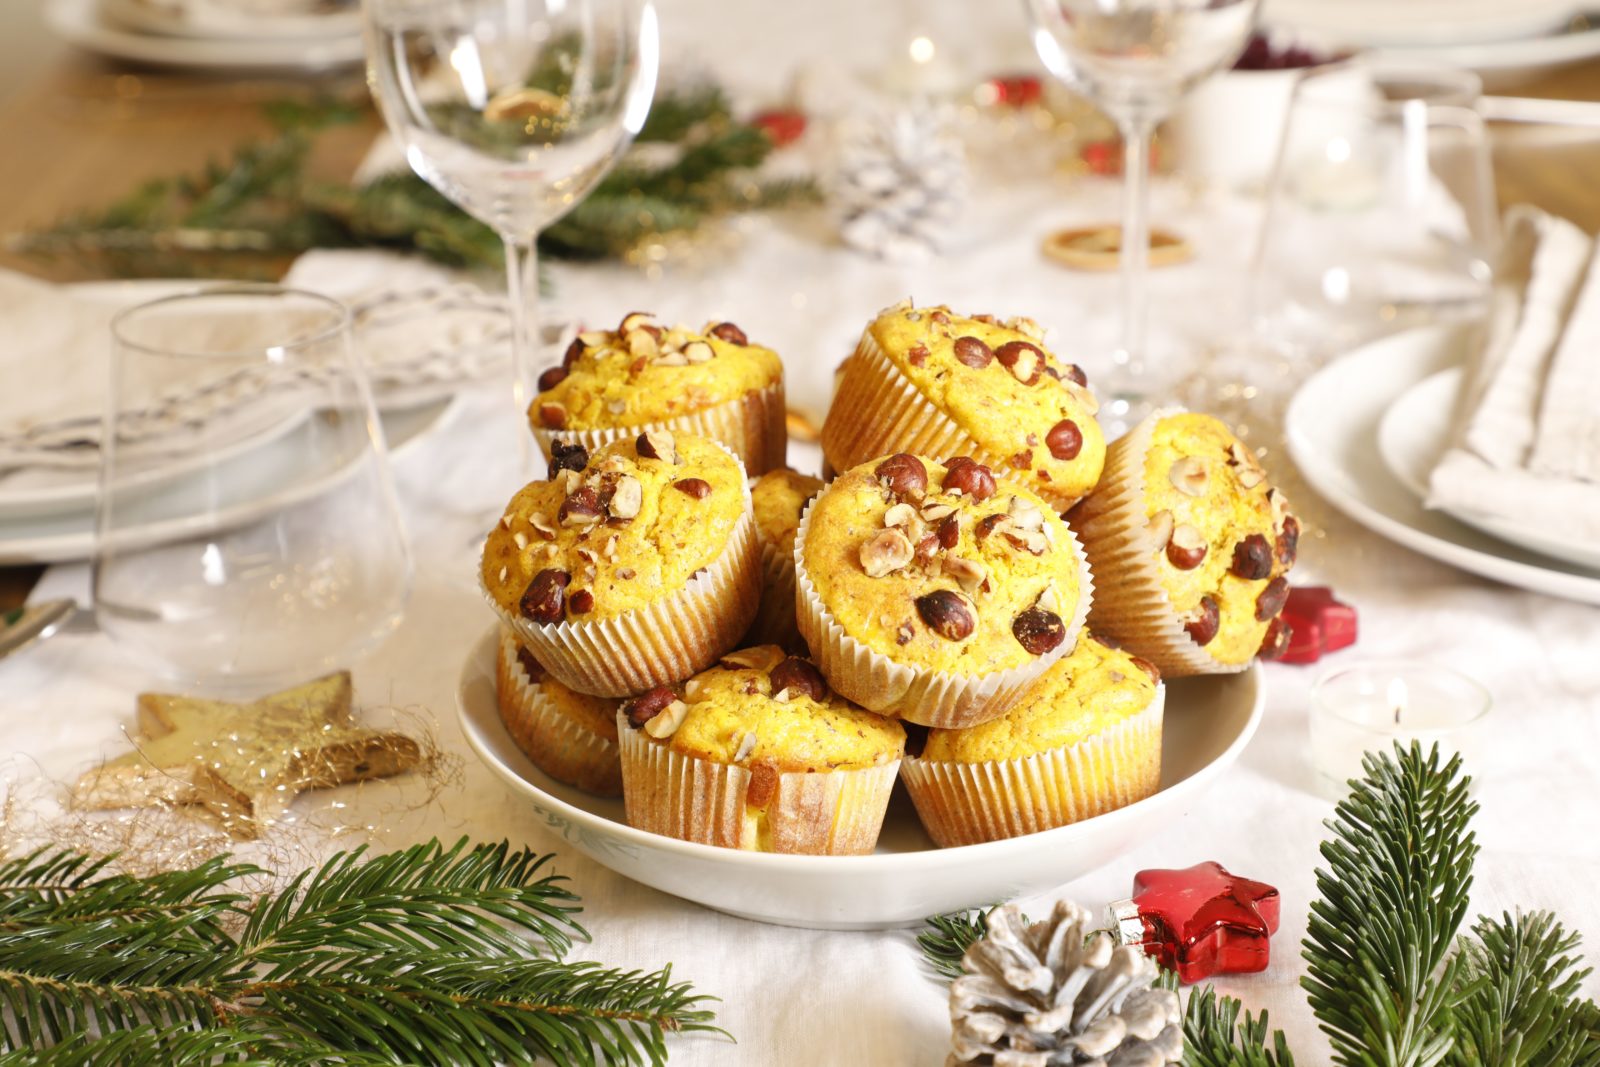 Polenta quince muffins with hazelnuts